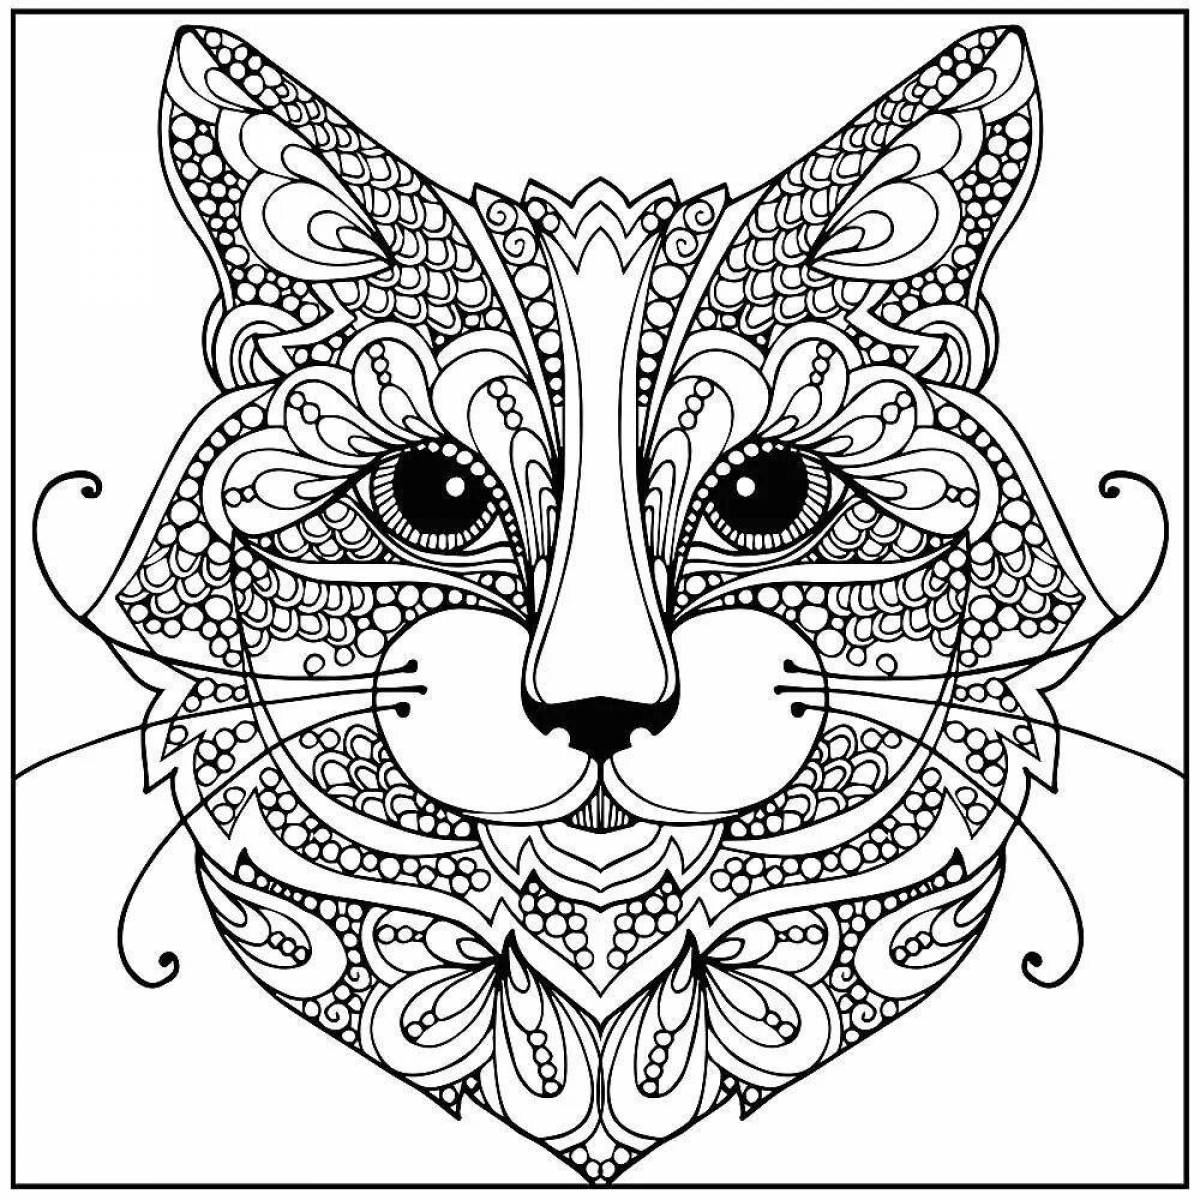 Glitter antistress coloring book